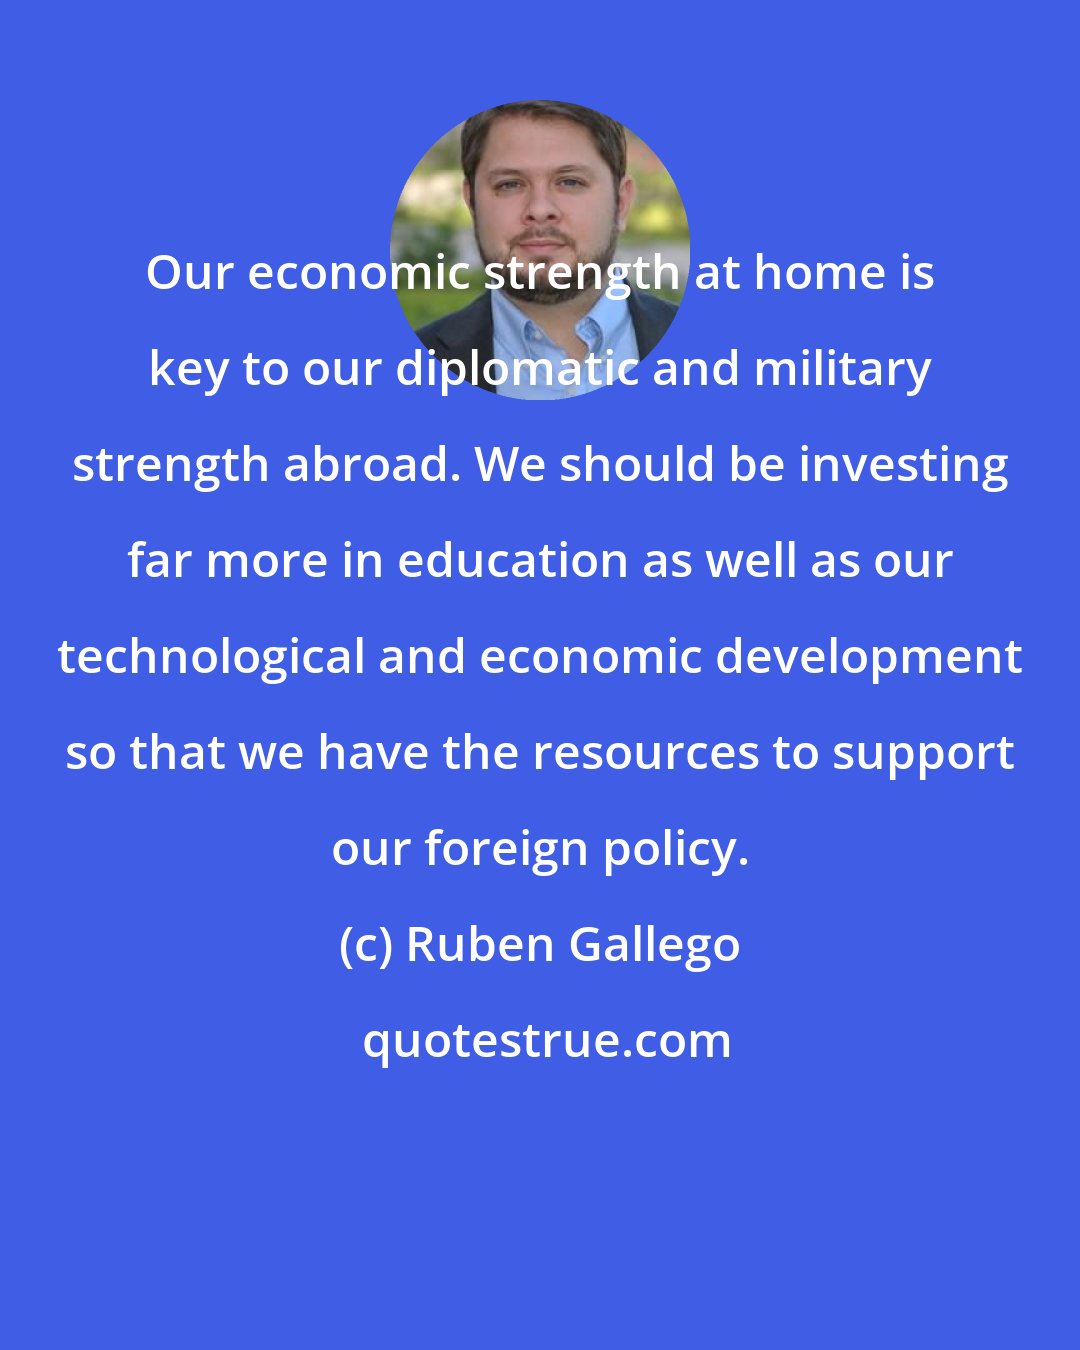 Ruben Gallego: Our economic strength at home is key to our diplomatic and military strength abroad. We should be investing far more in education as well as our technological and economic development so that we have the resources to support our foreign policy.